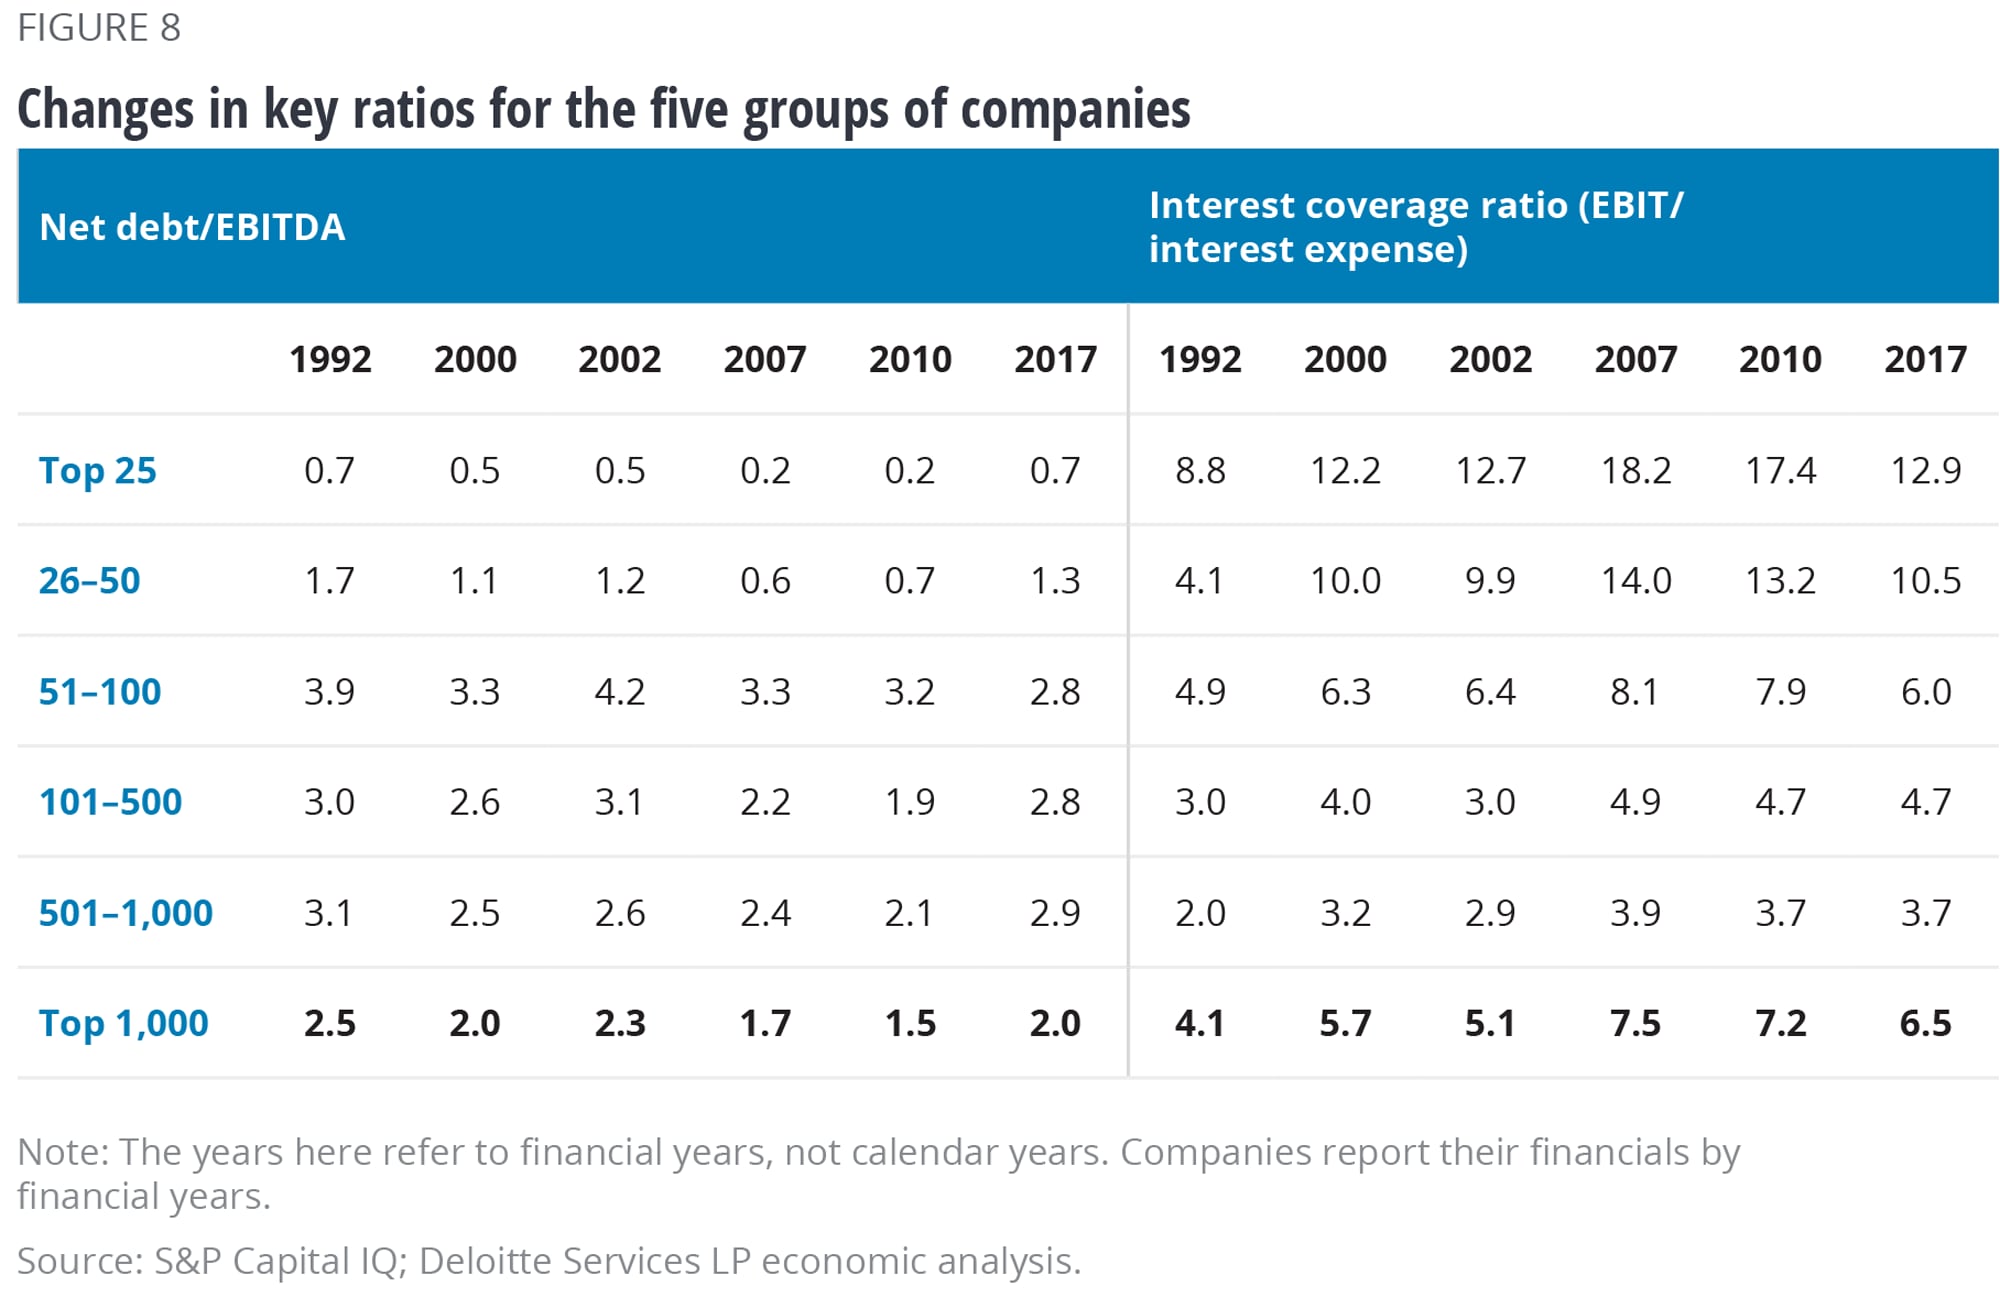 Changes in key ratios for the groups of companies